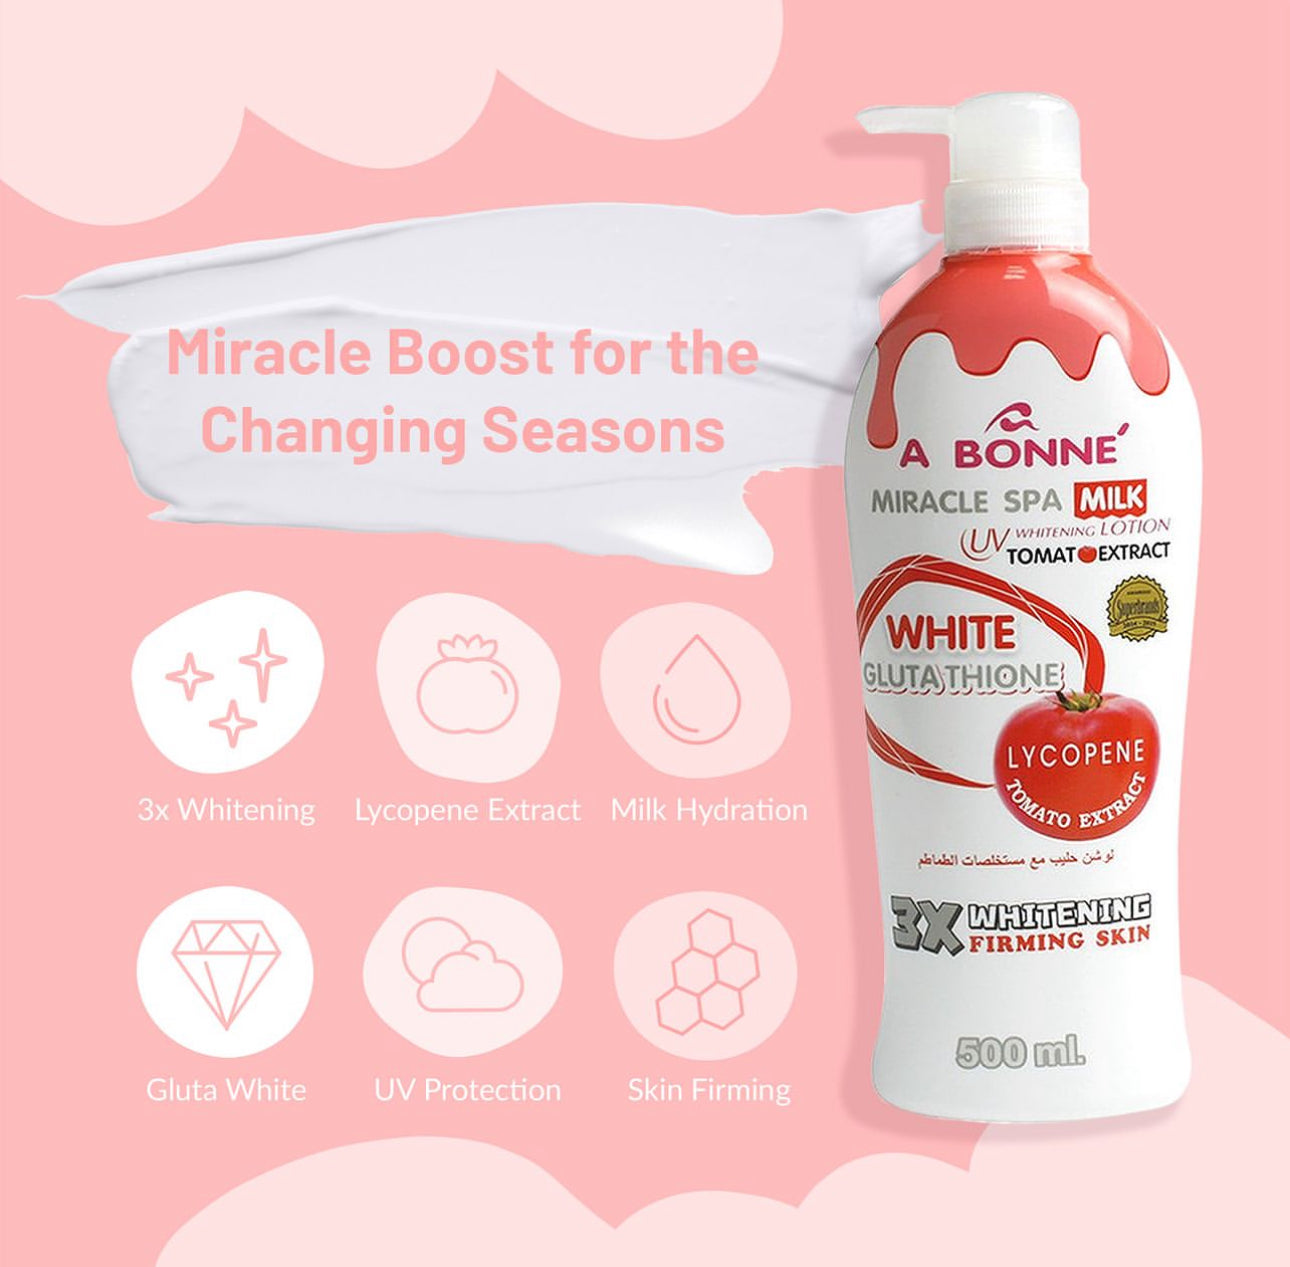 A Bonne’ Miracle Spa Milk Lotion with Tomato Extract 500ml